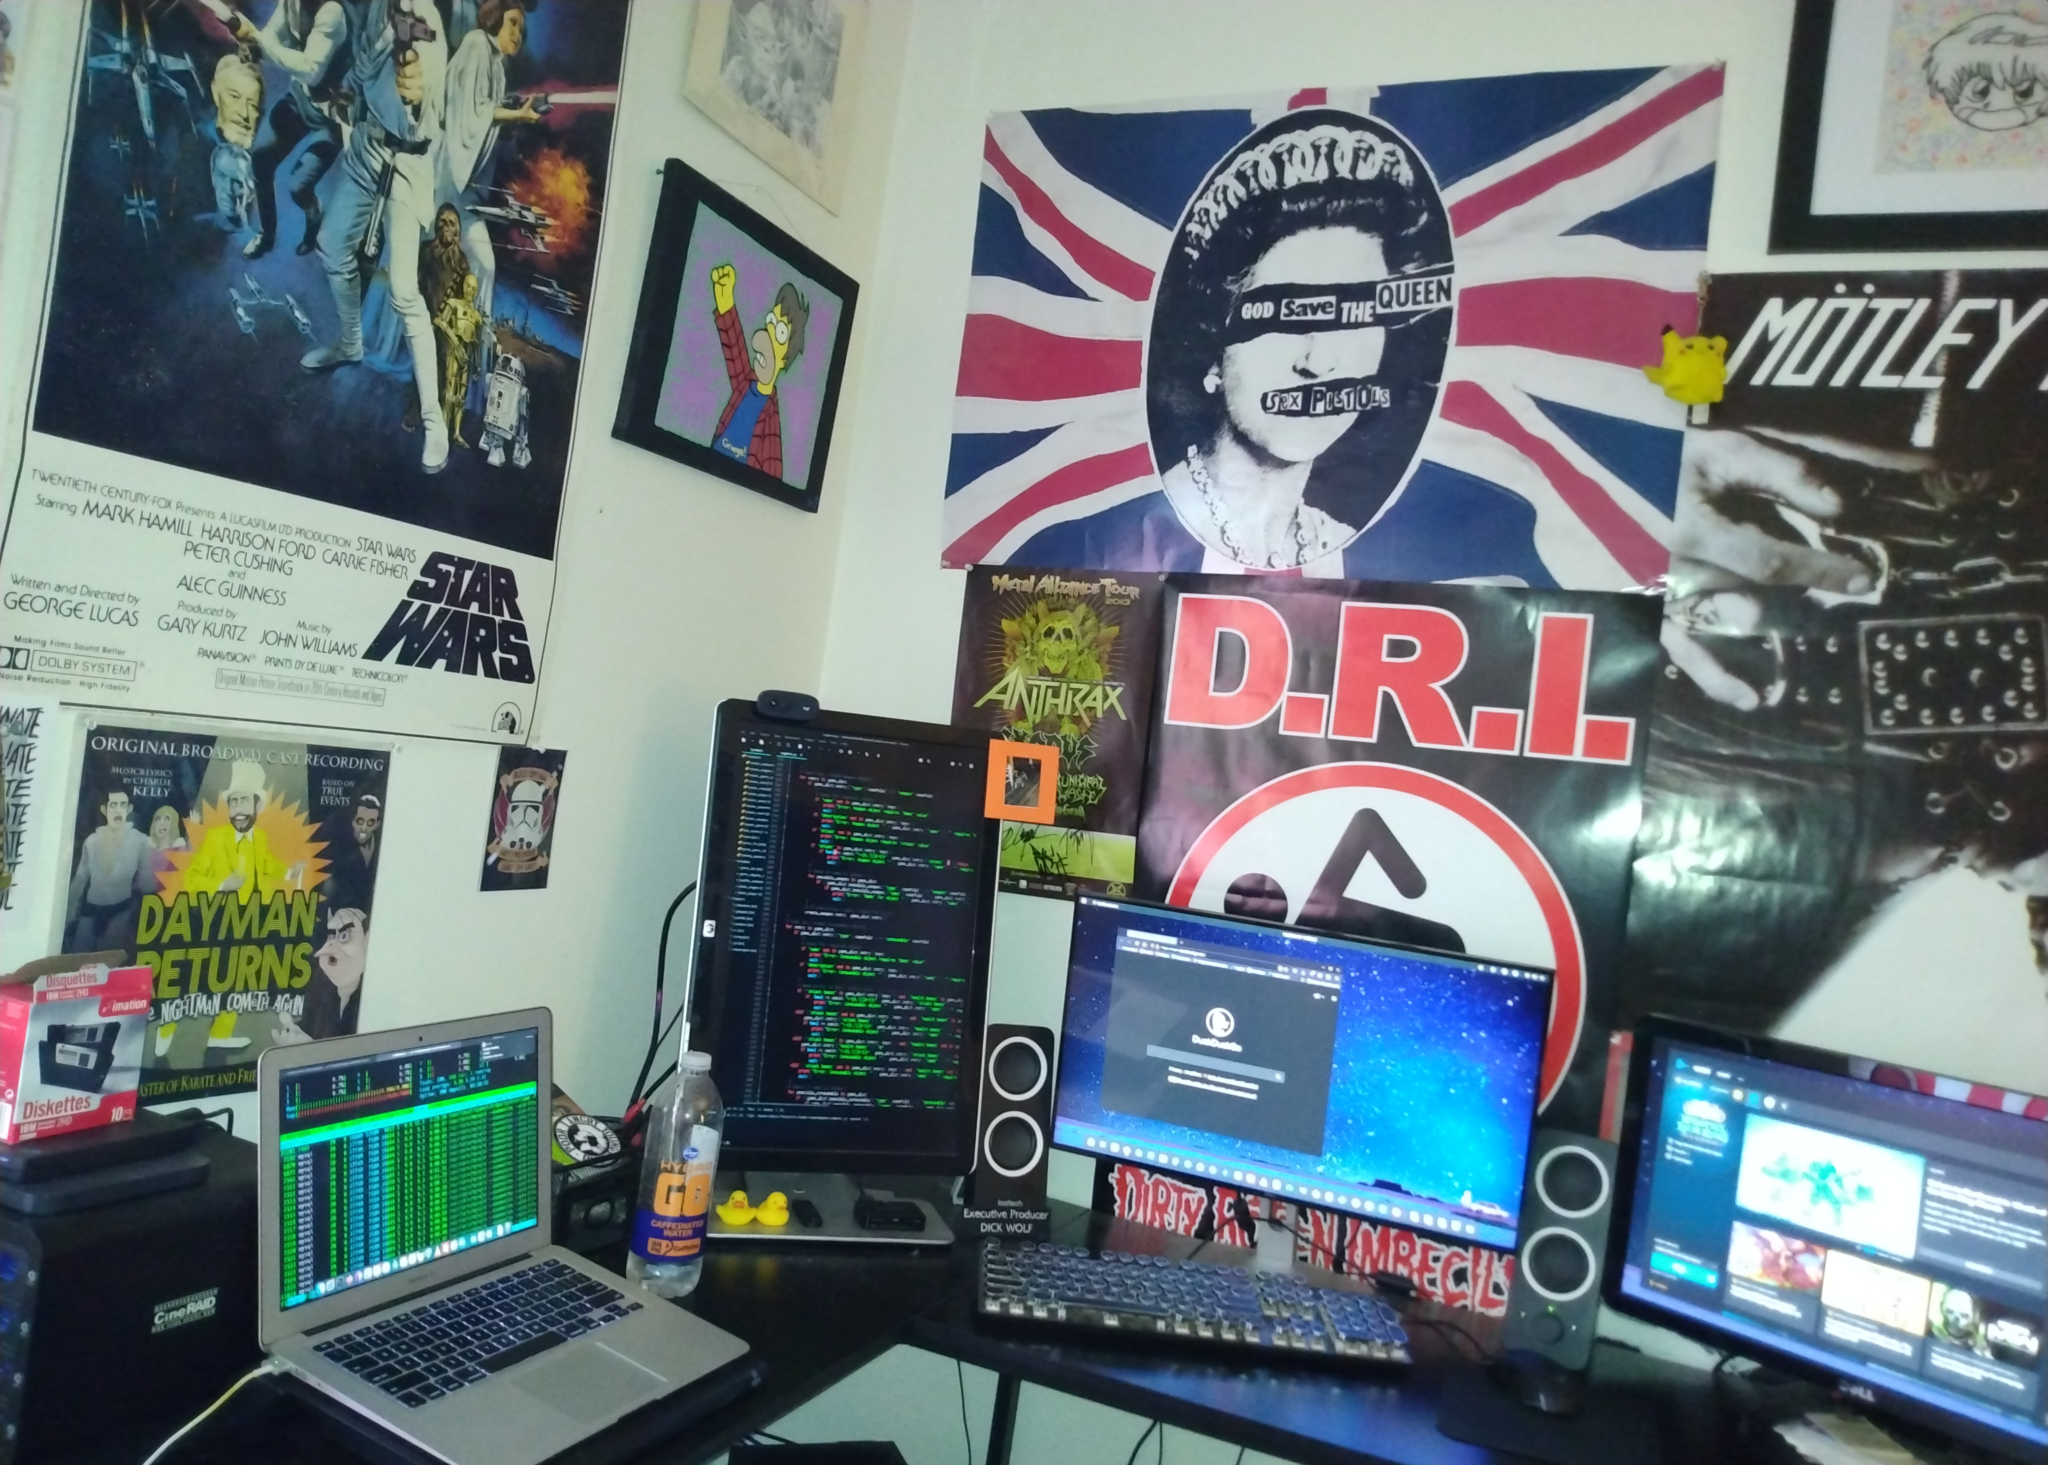 A desk setup with four computer monitors, a keyboard, speakers, two rubber ducks, and many posters on the walls.